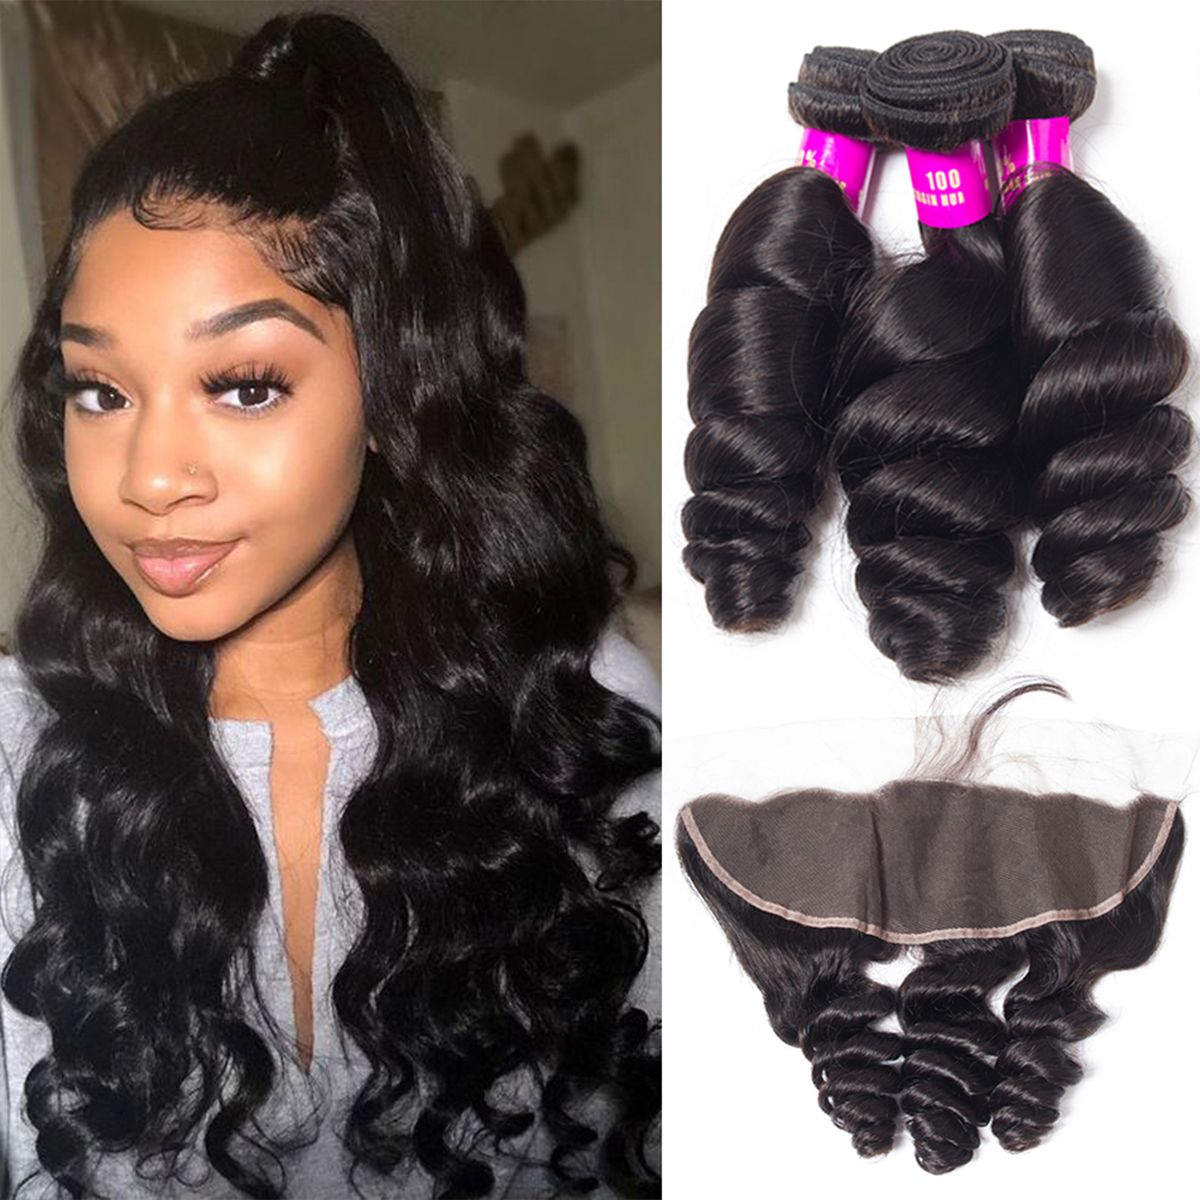 Tinashe Hair With Frontal Brazilian Loose Wave 100% Brazilian Virgin Remy Hair With Frontal Spring Loose Curly 3 Bundles With Frontal